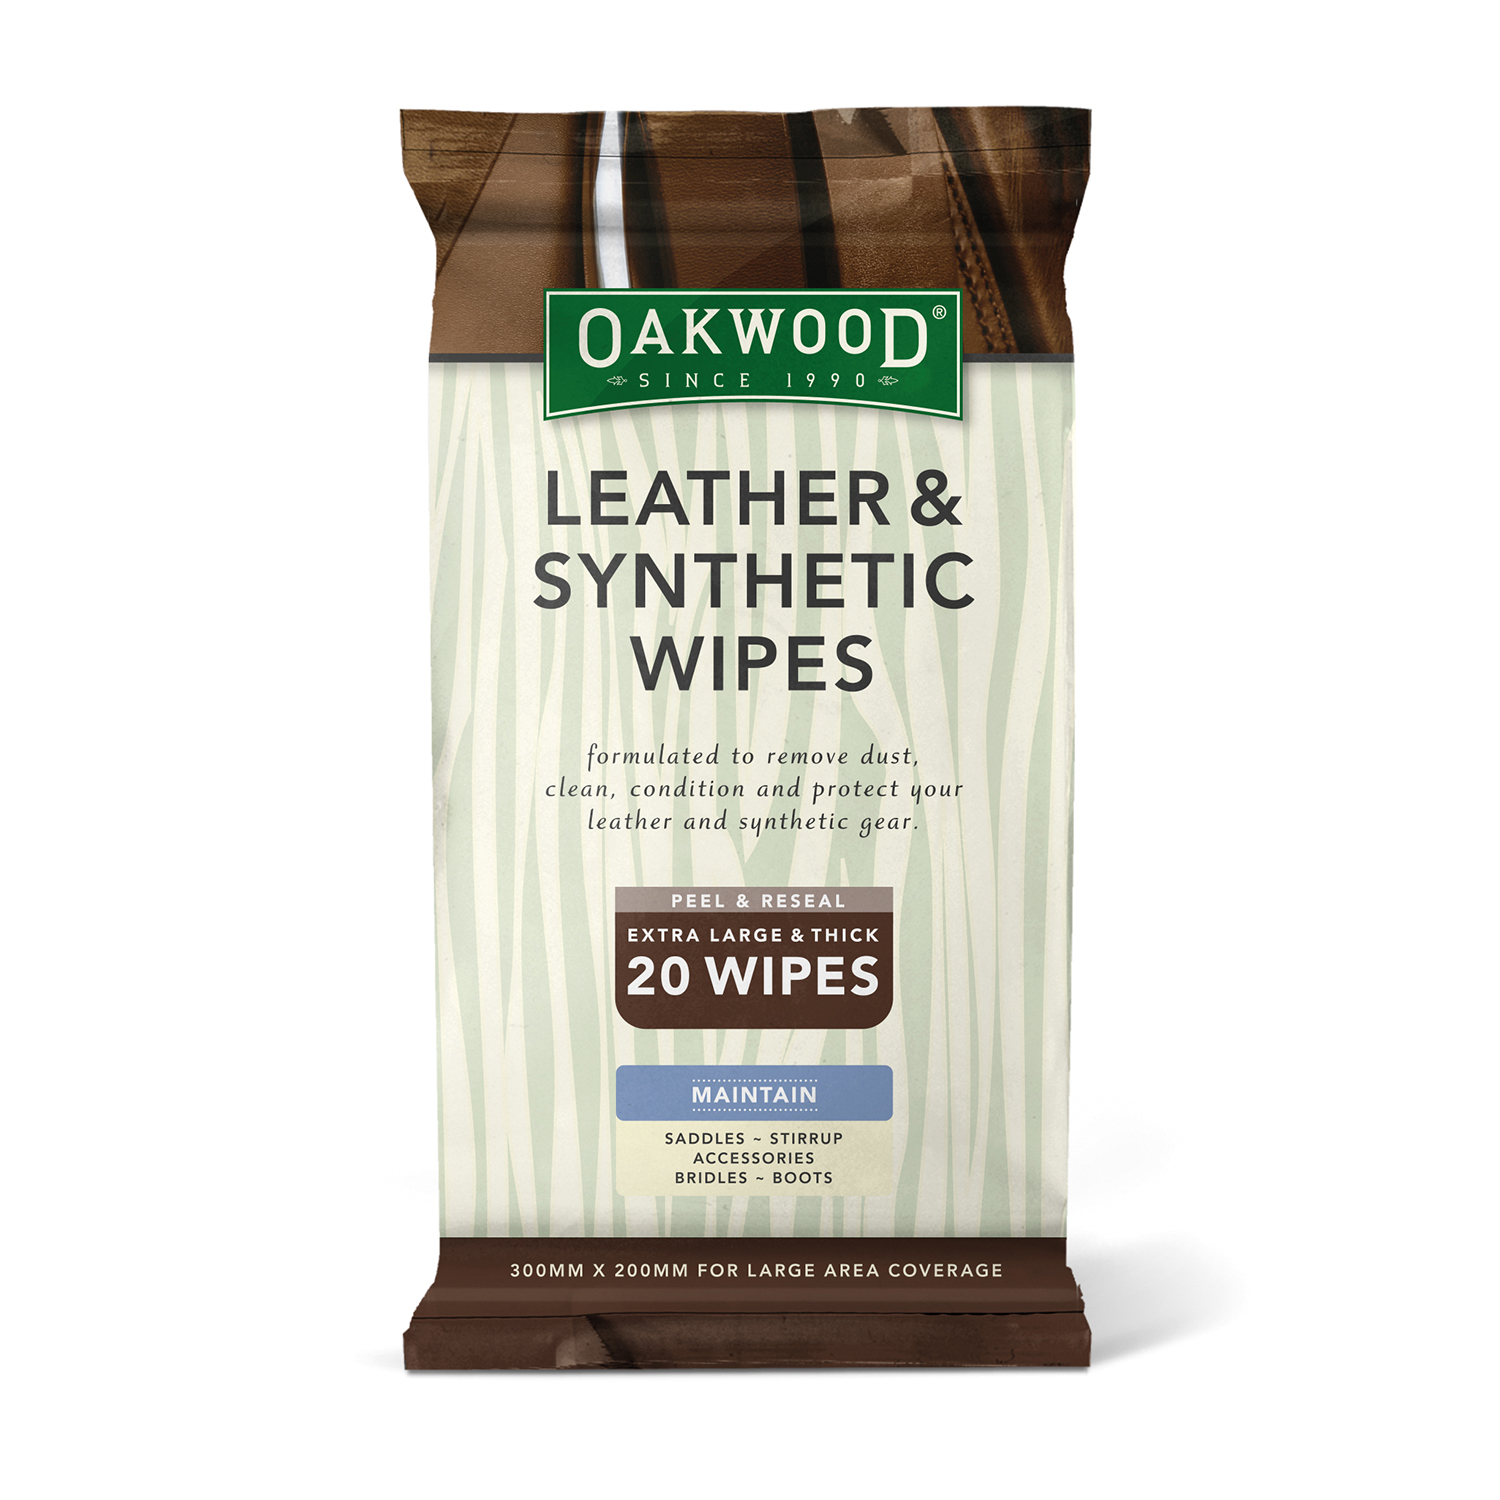 OAKWOOD LEATHER & SYNTHETIC WIPES 7 X 20 PACK 7 X 20 PACK